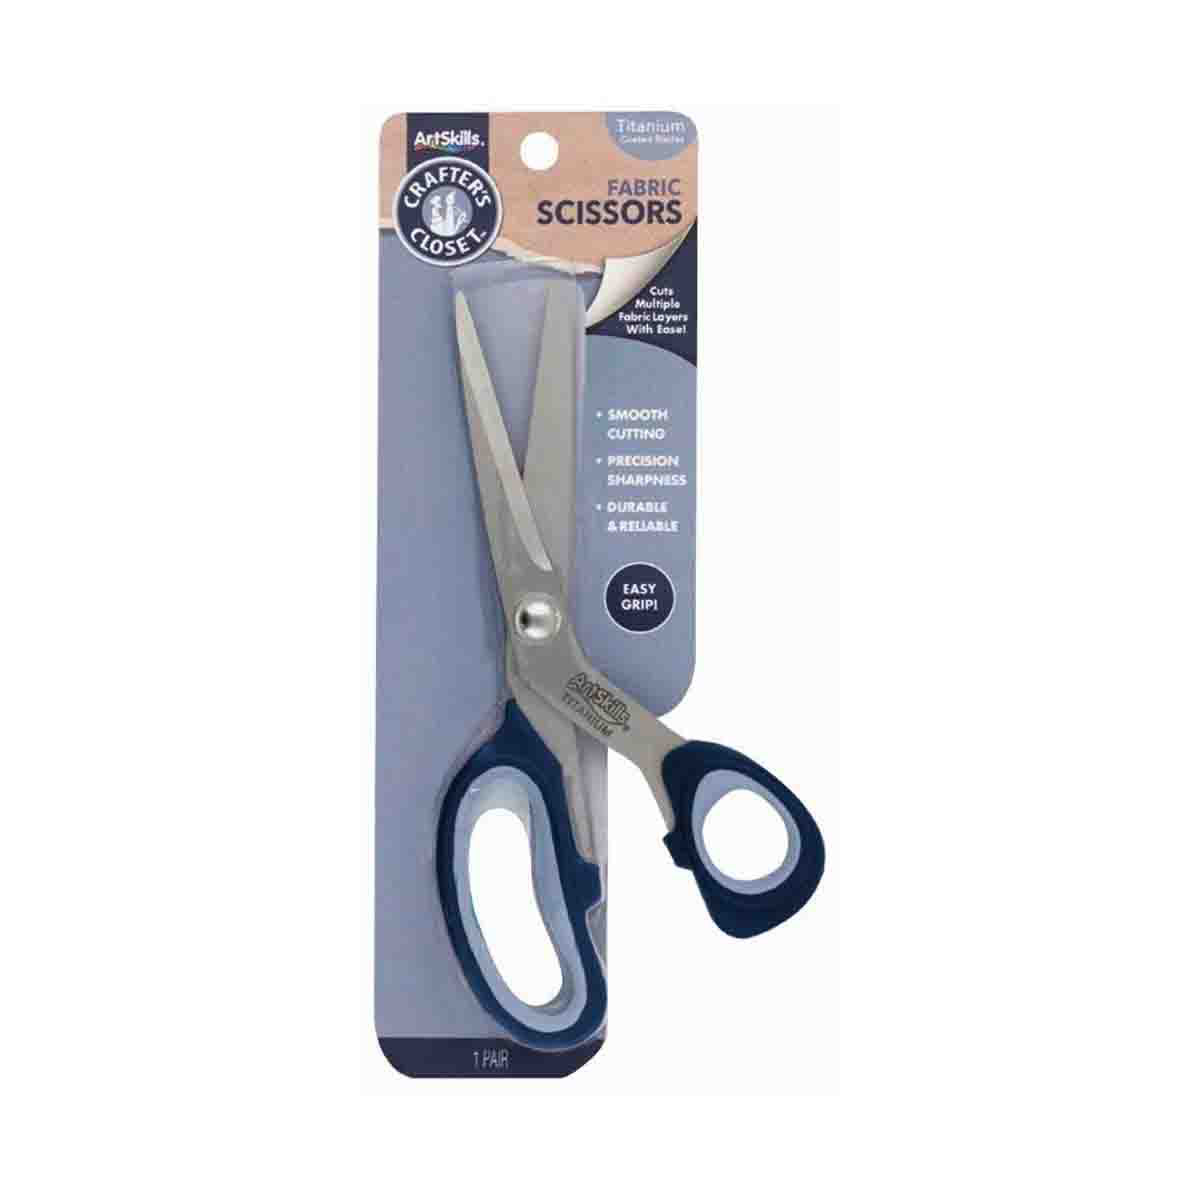 Crafter's Closet 8 Heavy Duty Fabric and Sewing Scissors, Titanium Blades